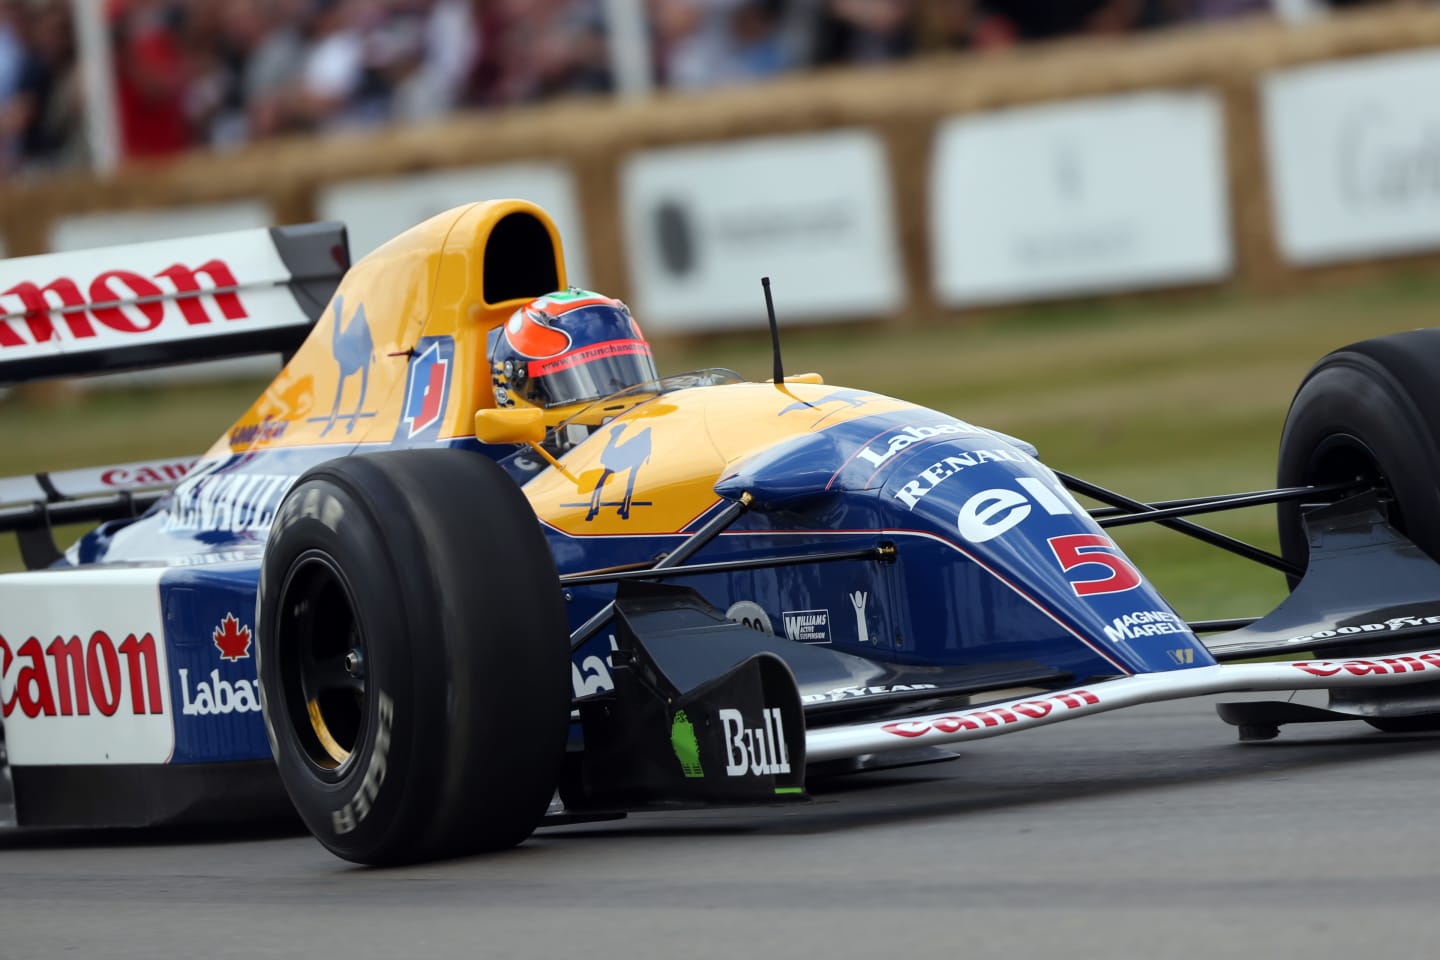 www.sutton-images.com Karun Chandhok (IND) Williams FW14B at Goodwood Festival of Speed, Goodwood, England, 30 June - 2 July 2017. © Sutton Images